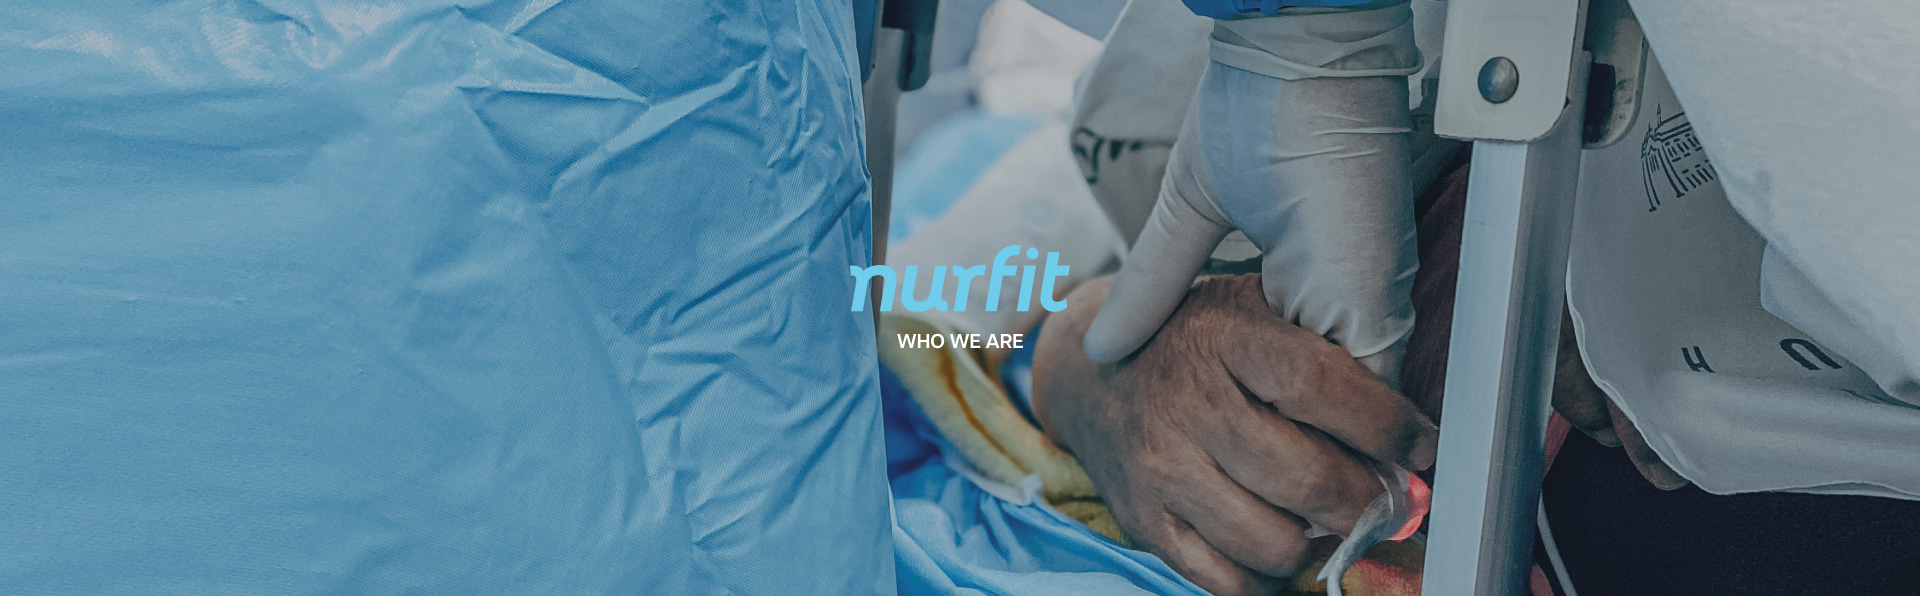 nurfit, who we are